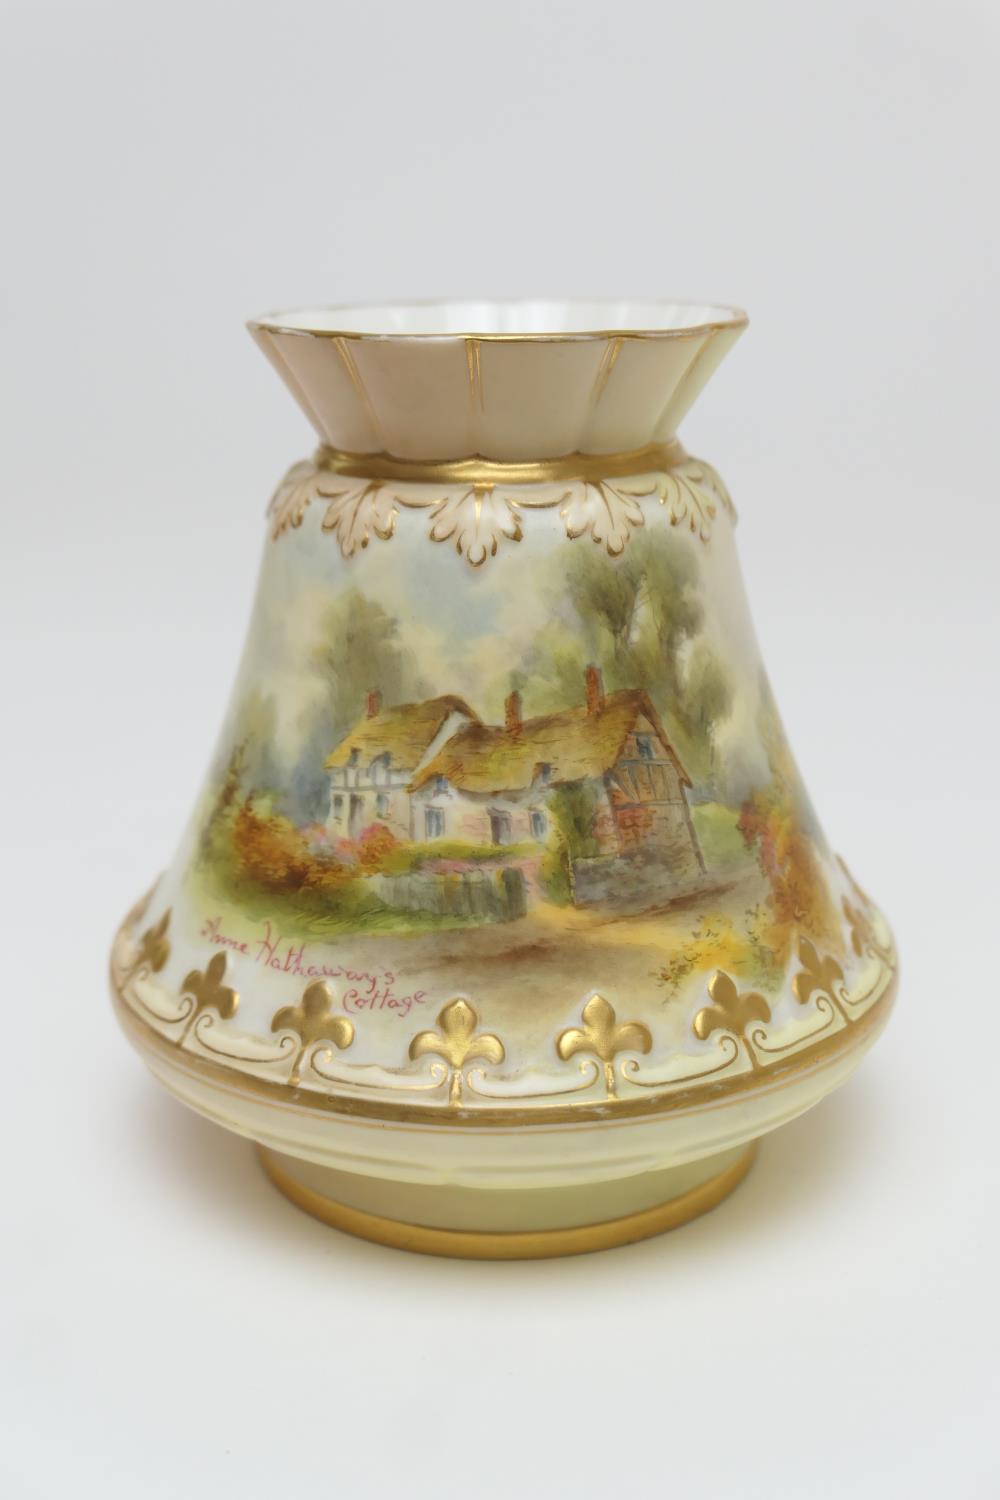 Grainger & Co. Worcester vase, circa 1897, shape G685, decorated with a view of Anne Hathaway's - Image 2 of 15